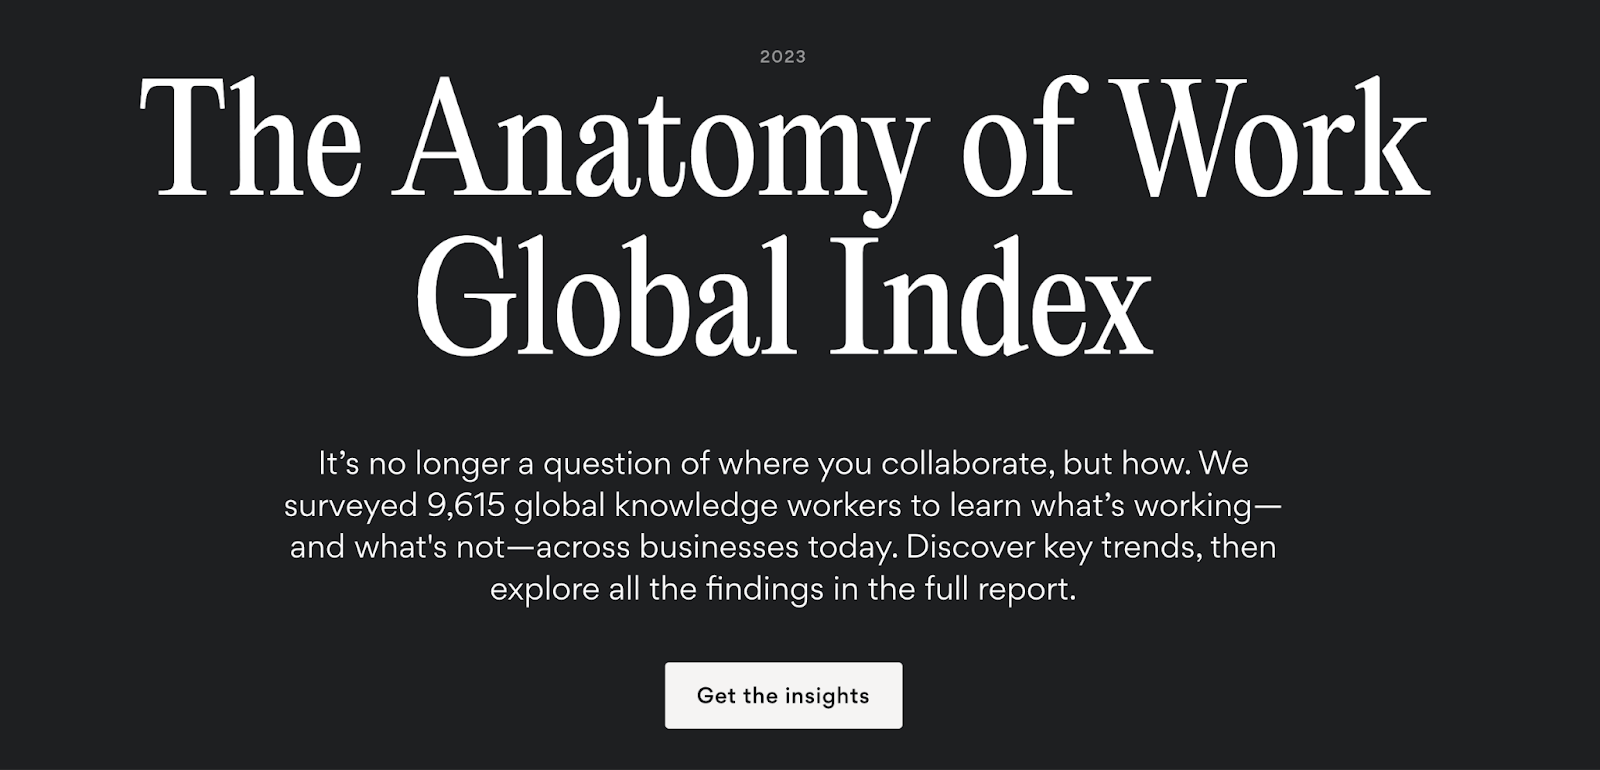 "The Anatomy of Work Global Index" landing page